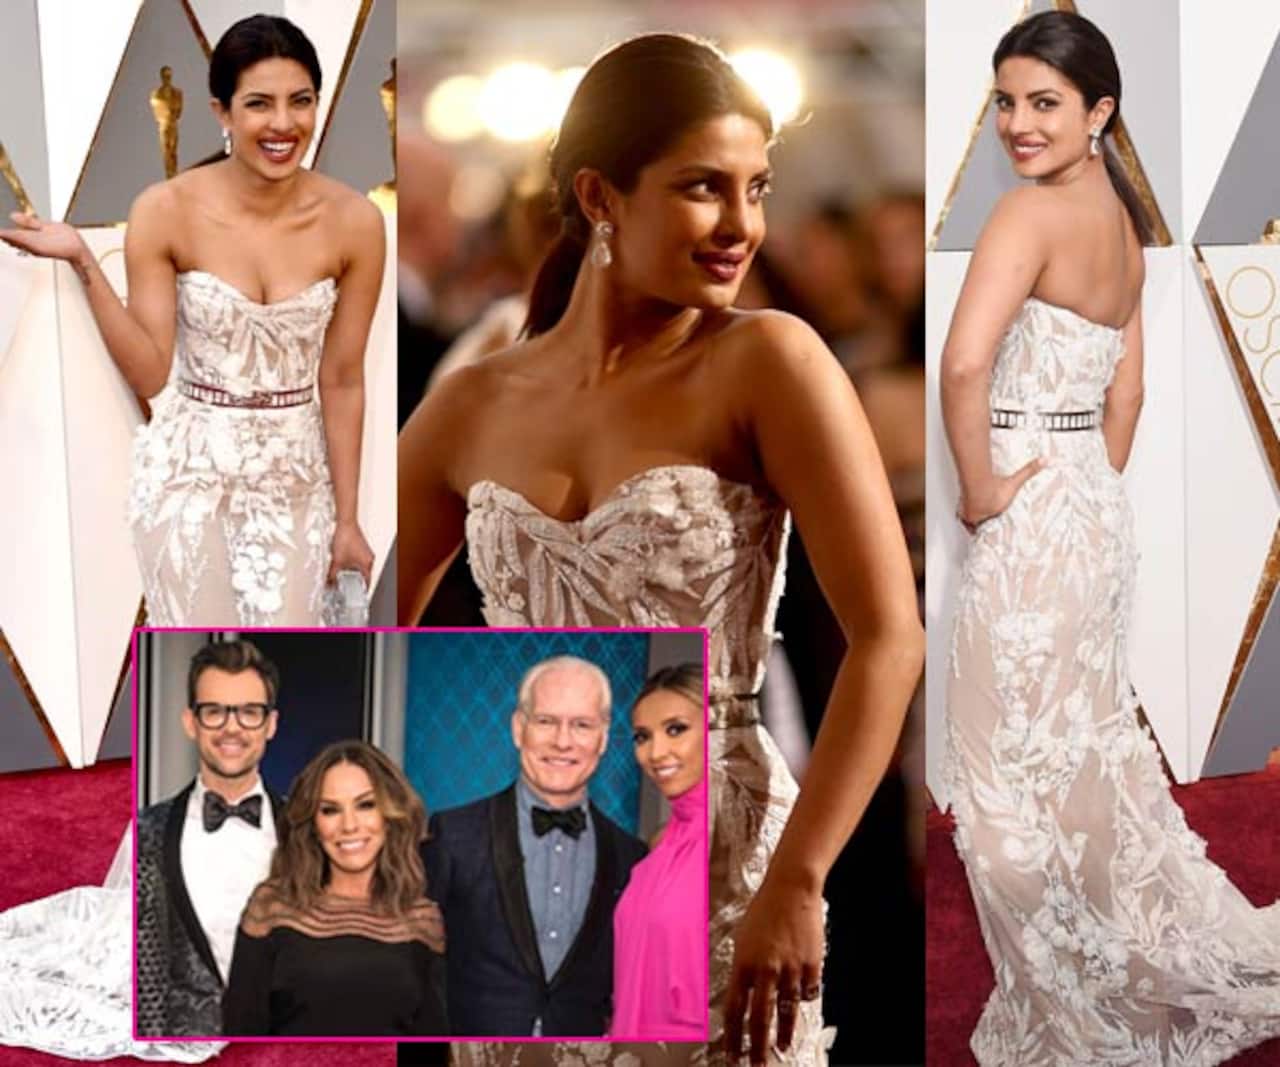 Priyanka Chopra WINS over the Hollywood Fashion Police with her HOT Oscars 2016 red carpet look - watch video!